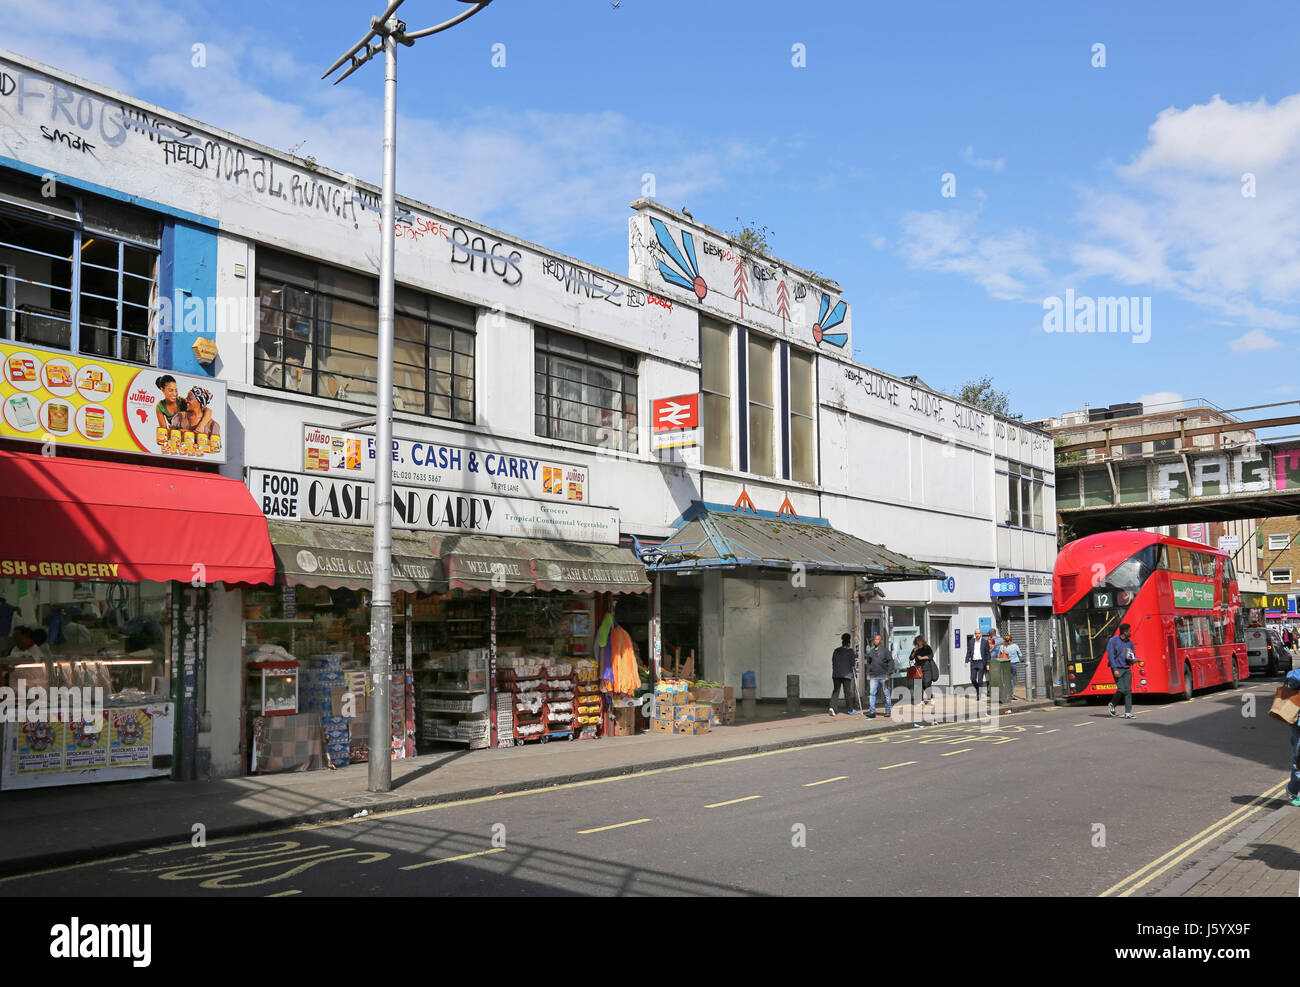 Entrance to Peckham Rye Station on Rye Lane in southeast London. Shows the run-down 1950s shopping arcade scheduled for demolition in new plans. Stock Photo